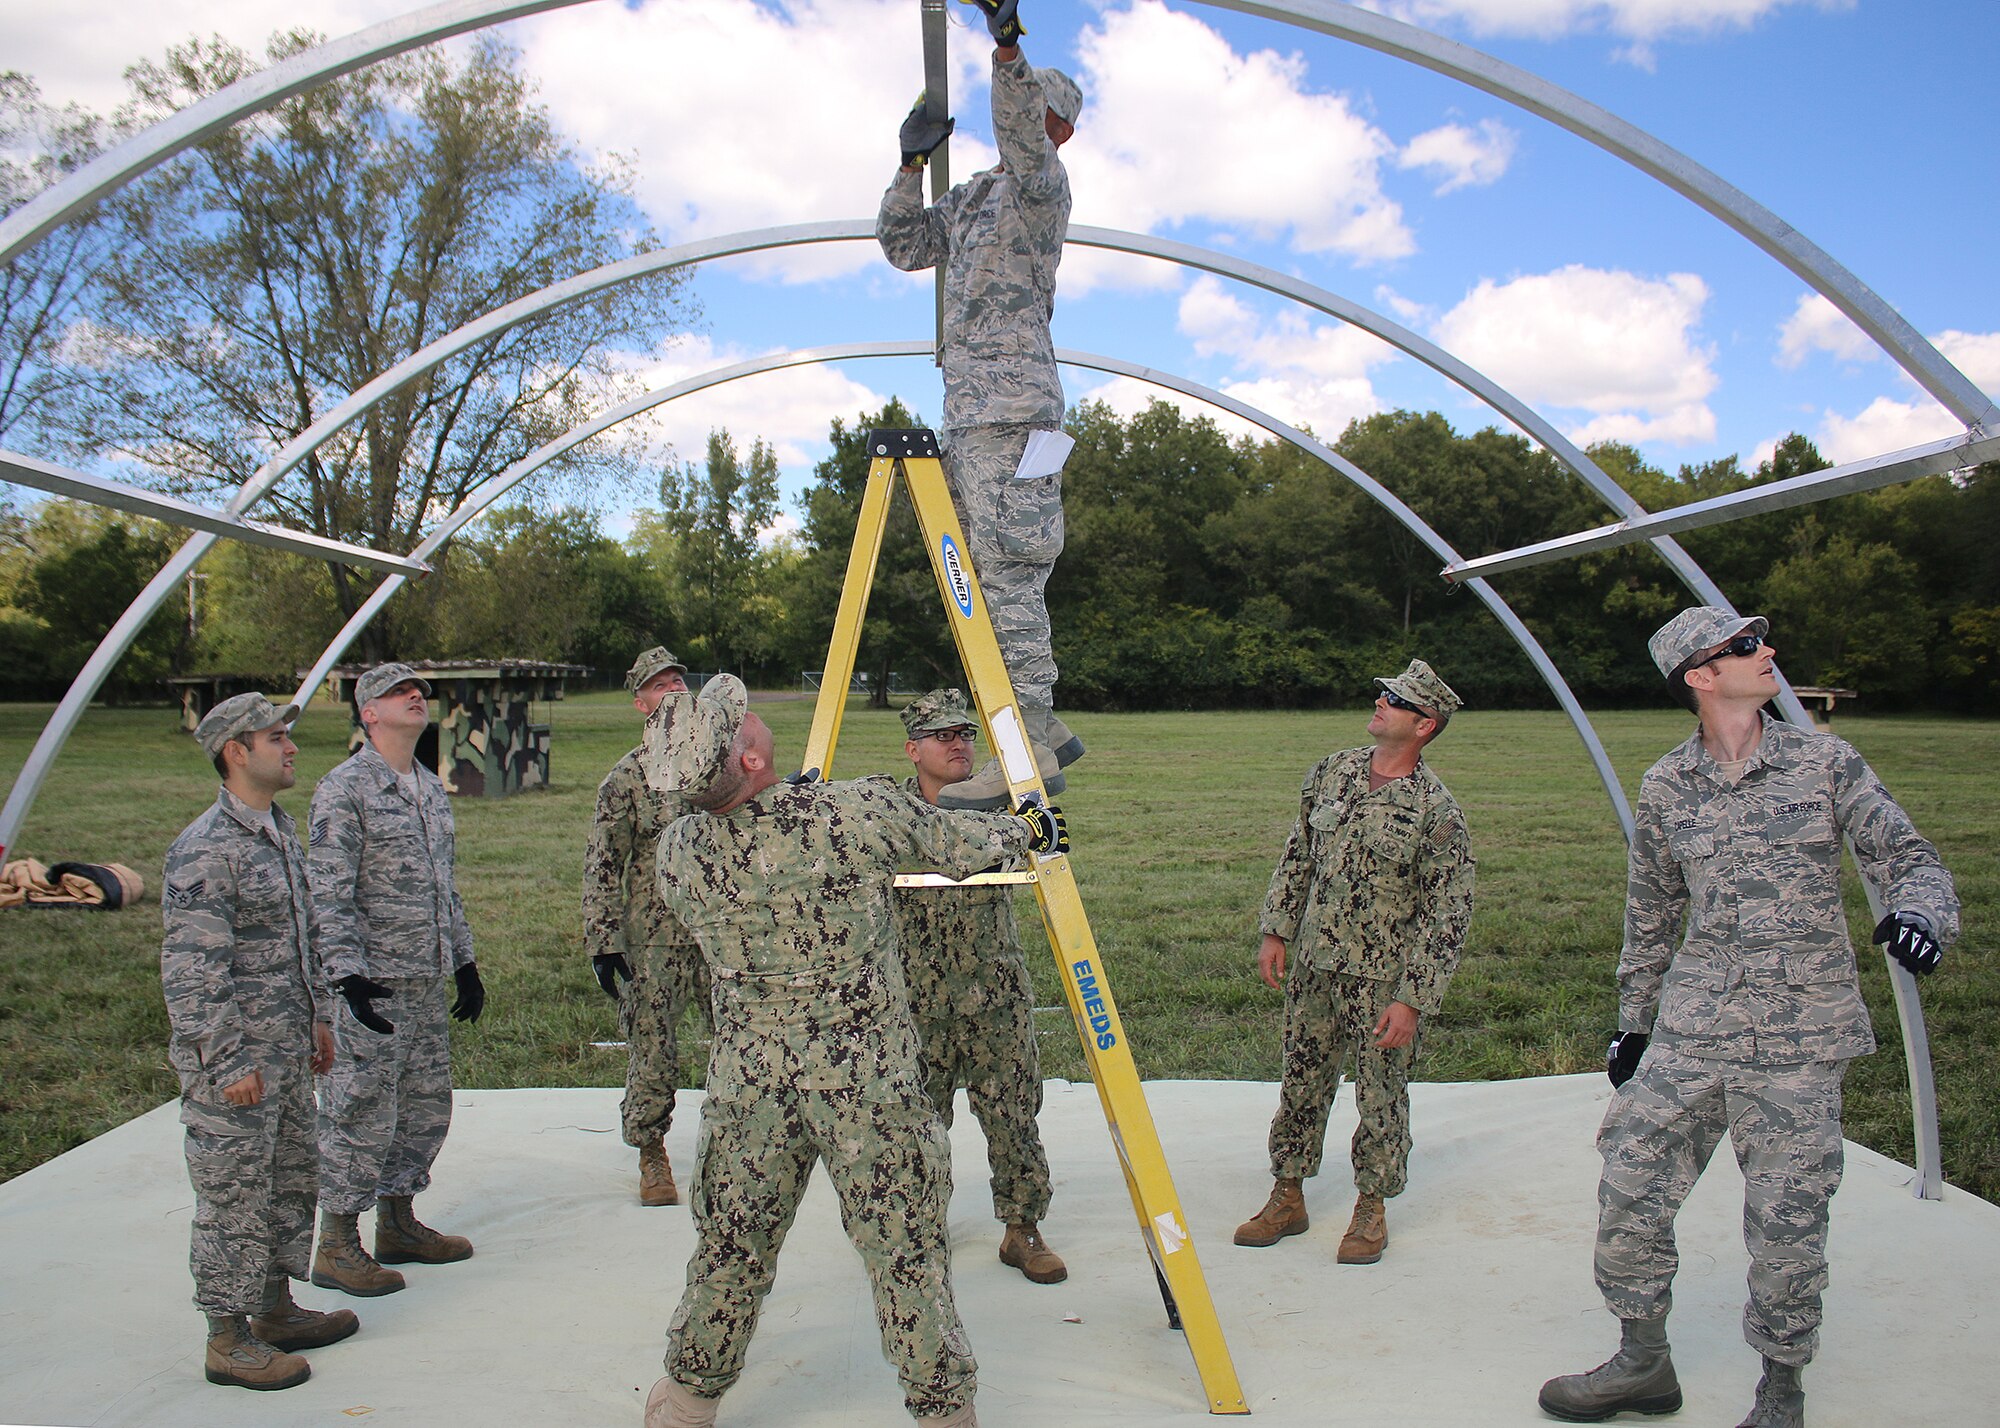 WRIGHT-PATTERSON AIR FORCE BASE, Ohio –Members of the 445th Civil Engineering Squadron and Sailors from Navy Cargo Handling Battalion 10 work to erect an Alaskan tent during a bivouac training exercise at the Warfighter Training Center Sept. 13, 2015. The Alaskan is one of many types of tents used on deployments. During the three days of training, service members covered a wide array of topics ranging from tent set-up, damage assessment response, and land navigation, to radio communications, attack preparation, and self-aid buddy care.  (U.S. Air Force photo /Tech. Sgt. Patrick O’Reilly)
